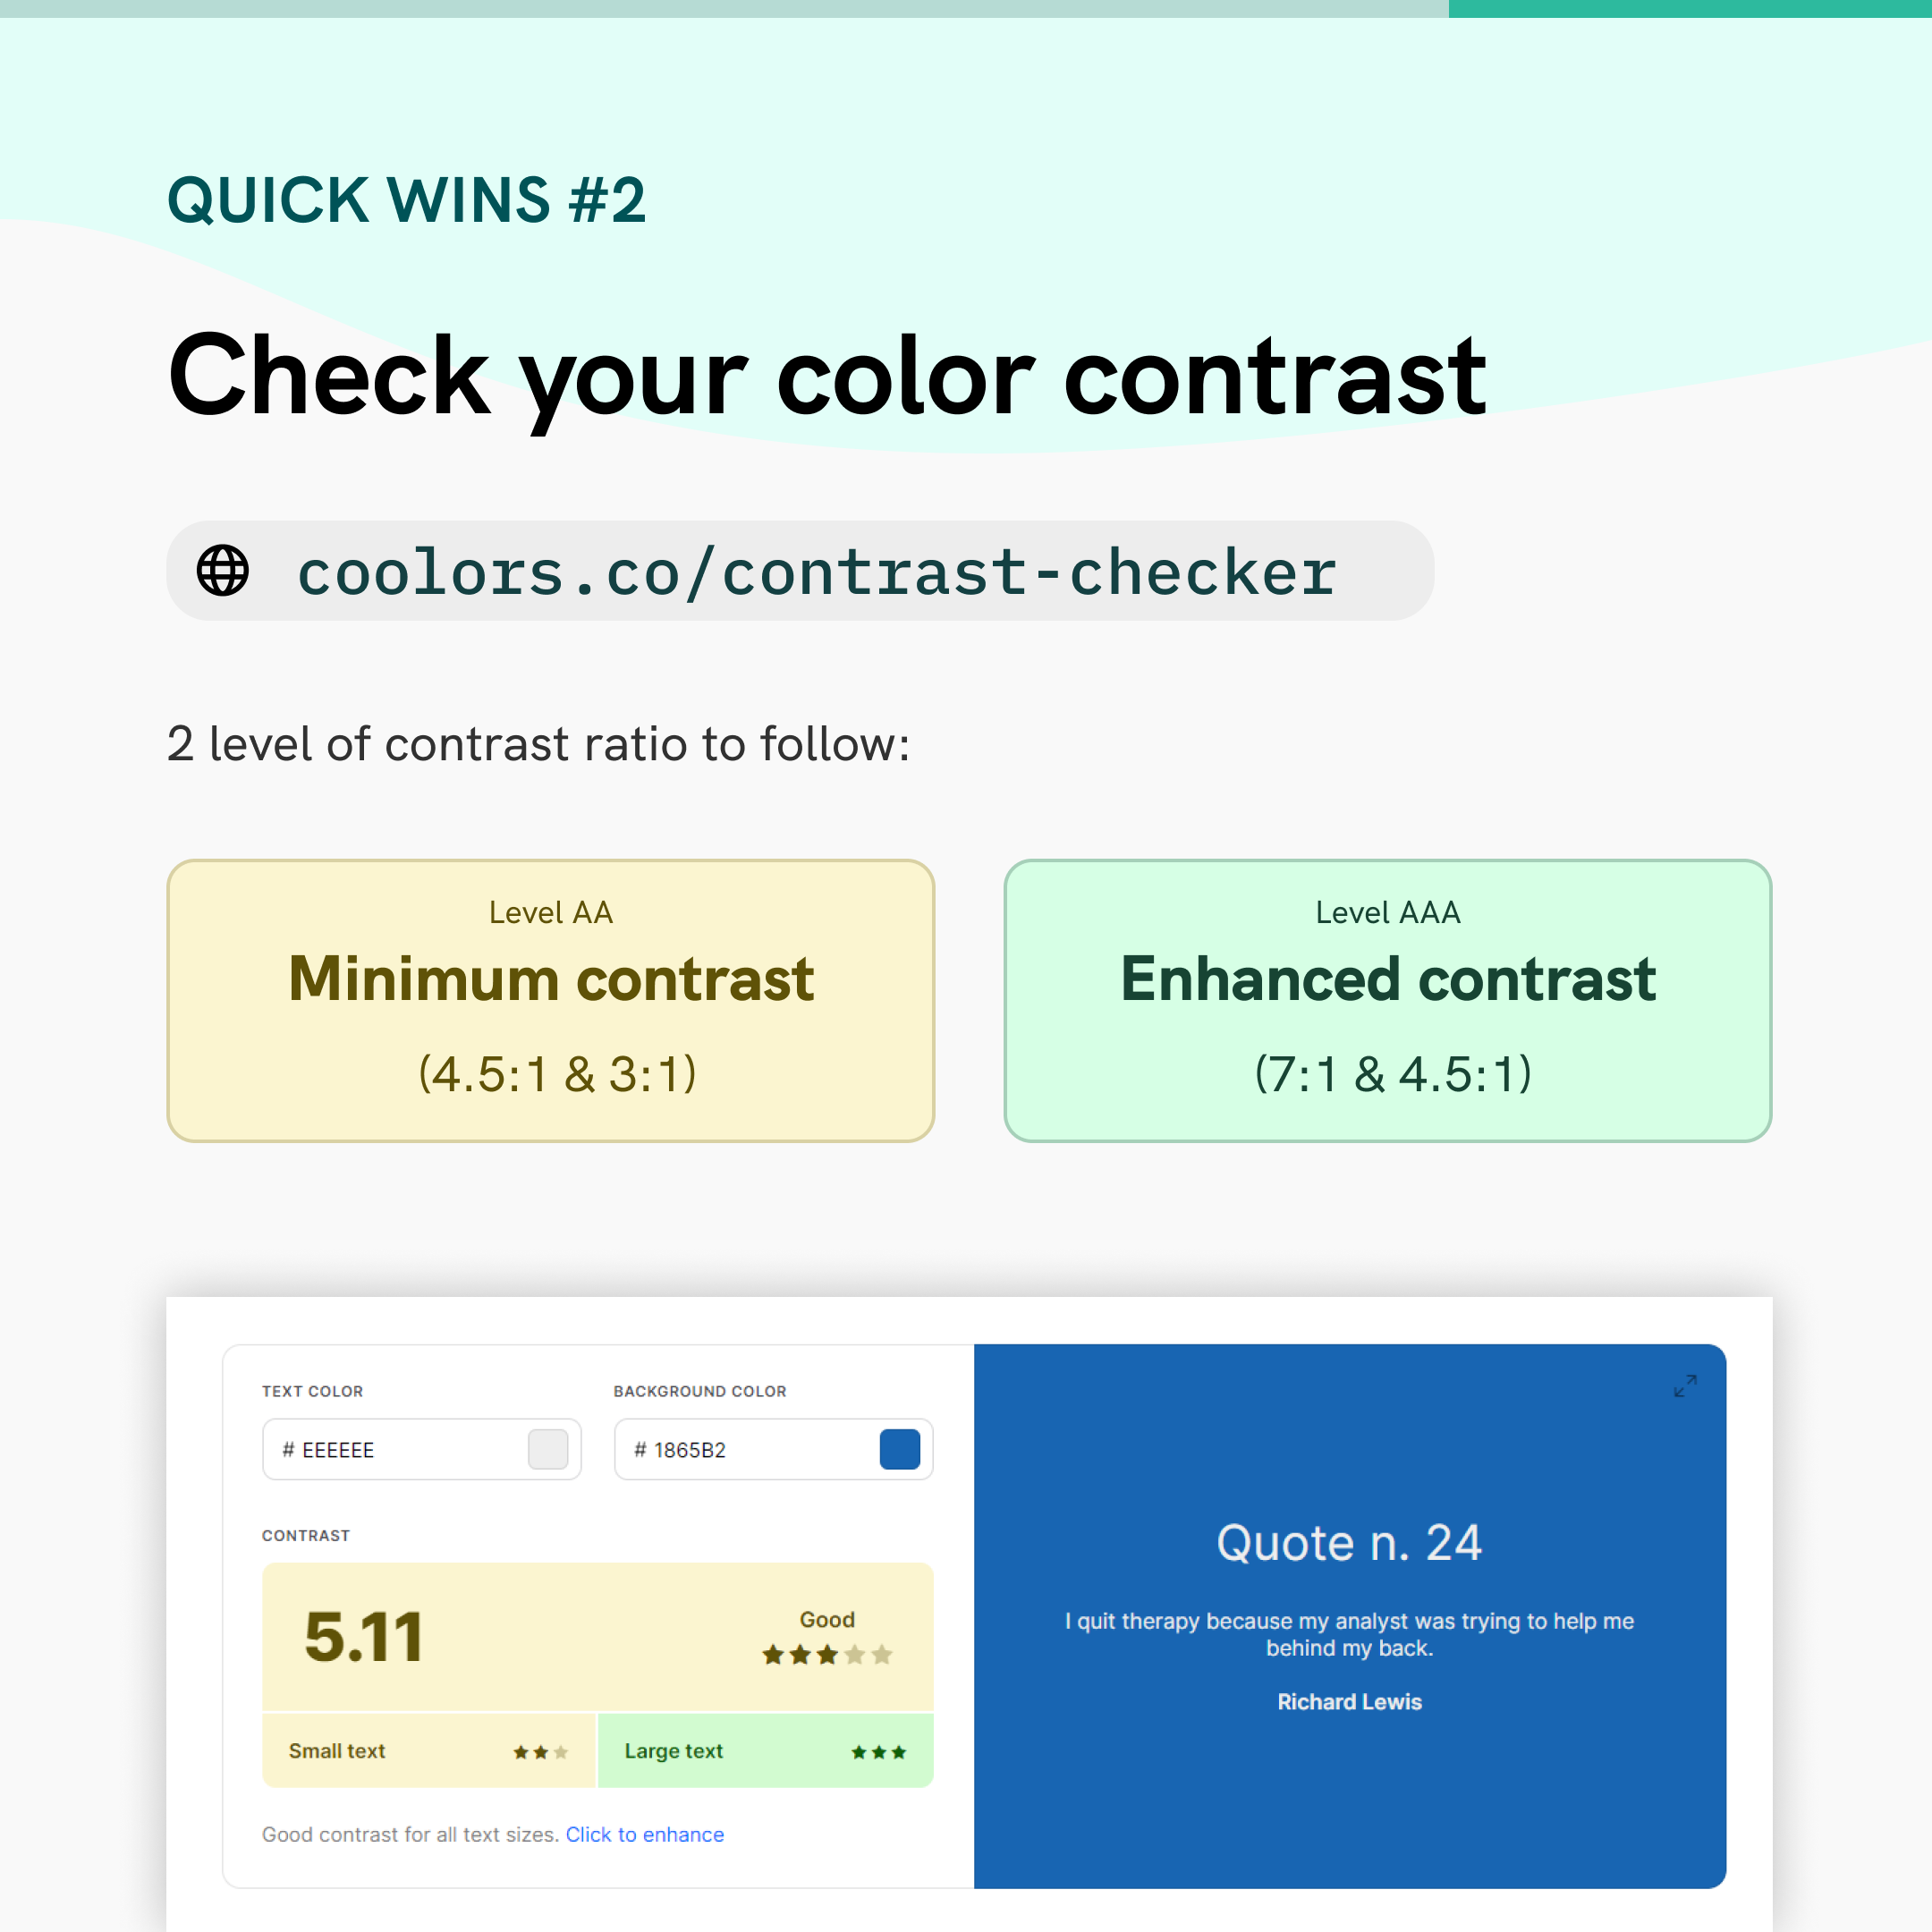 Check your color contrast with Contrast Checker, minimum contrast should be (4.5:1 & 3:1)